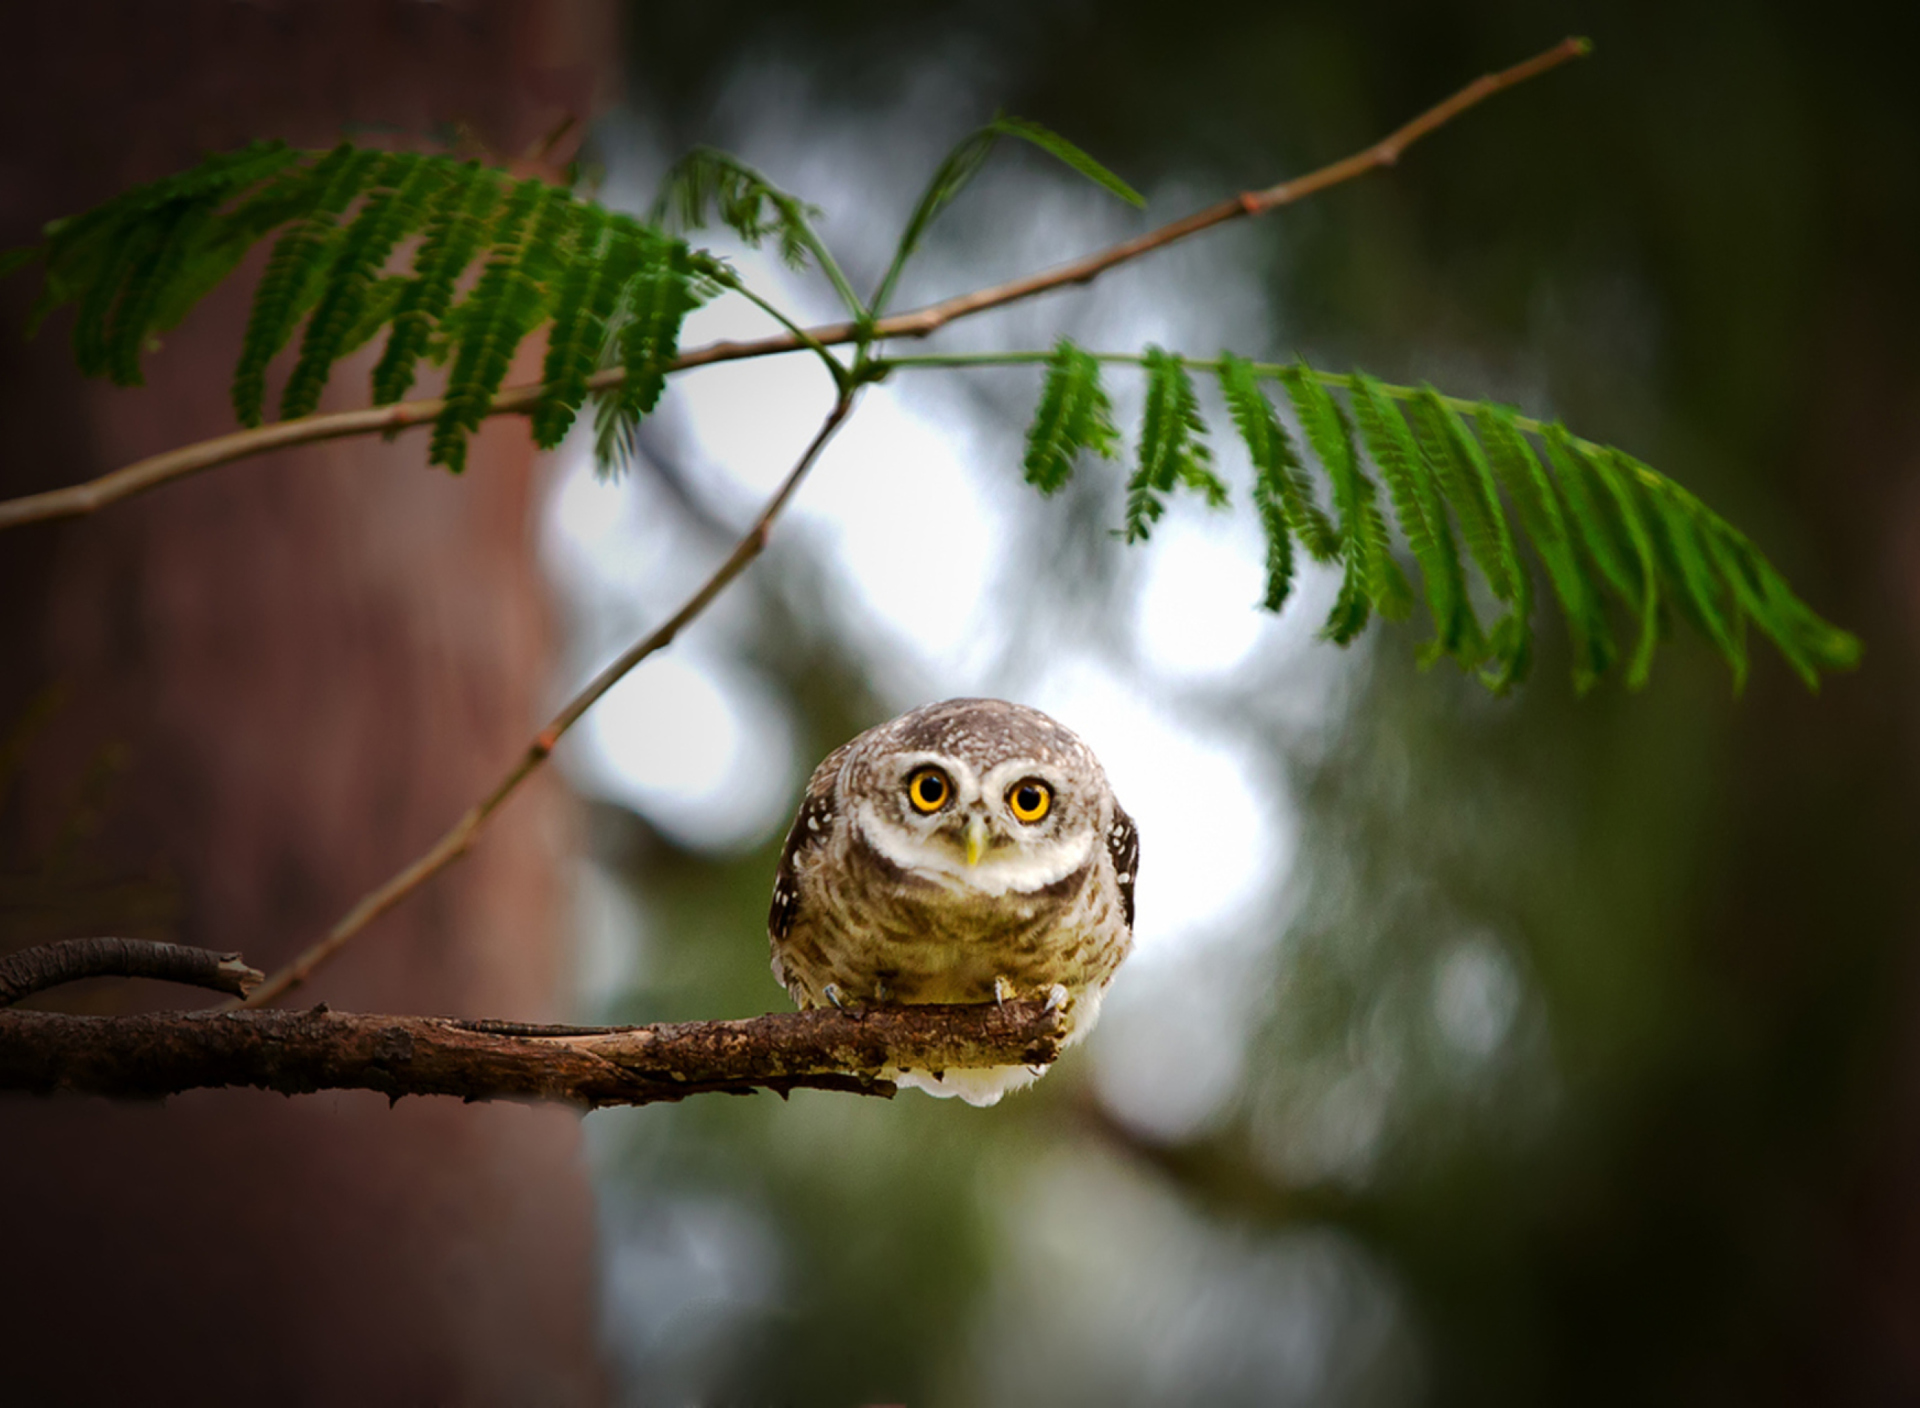 Cute And Funny Little Owl With Big Eyes wallpaper 1920x1408